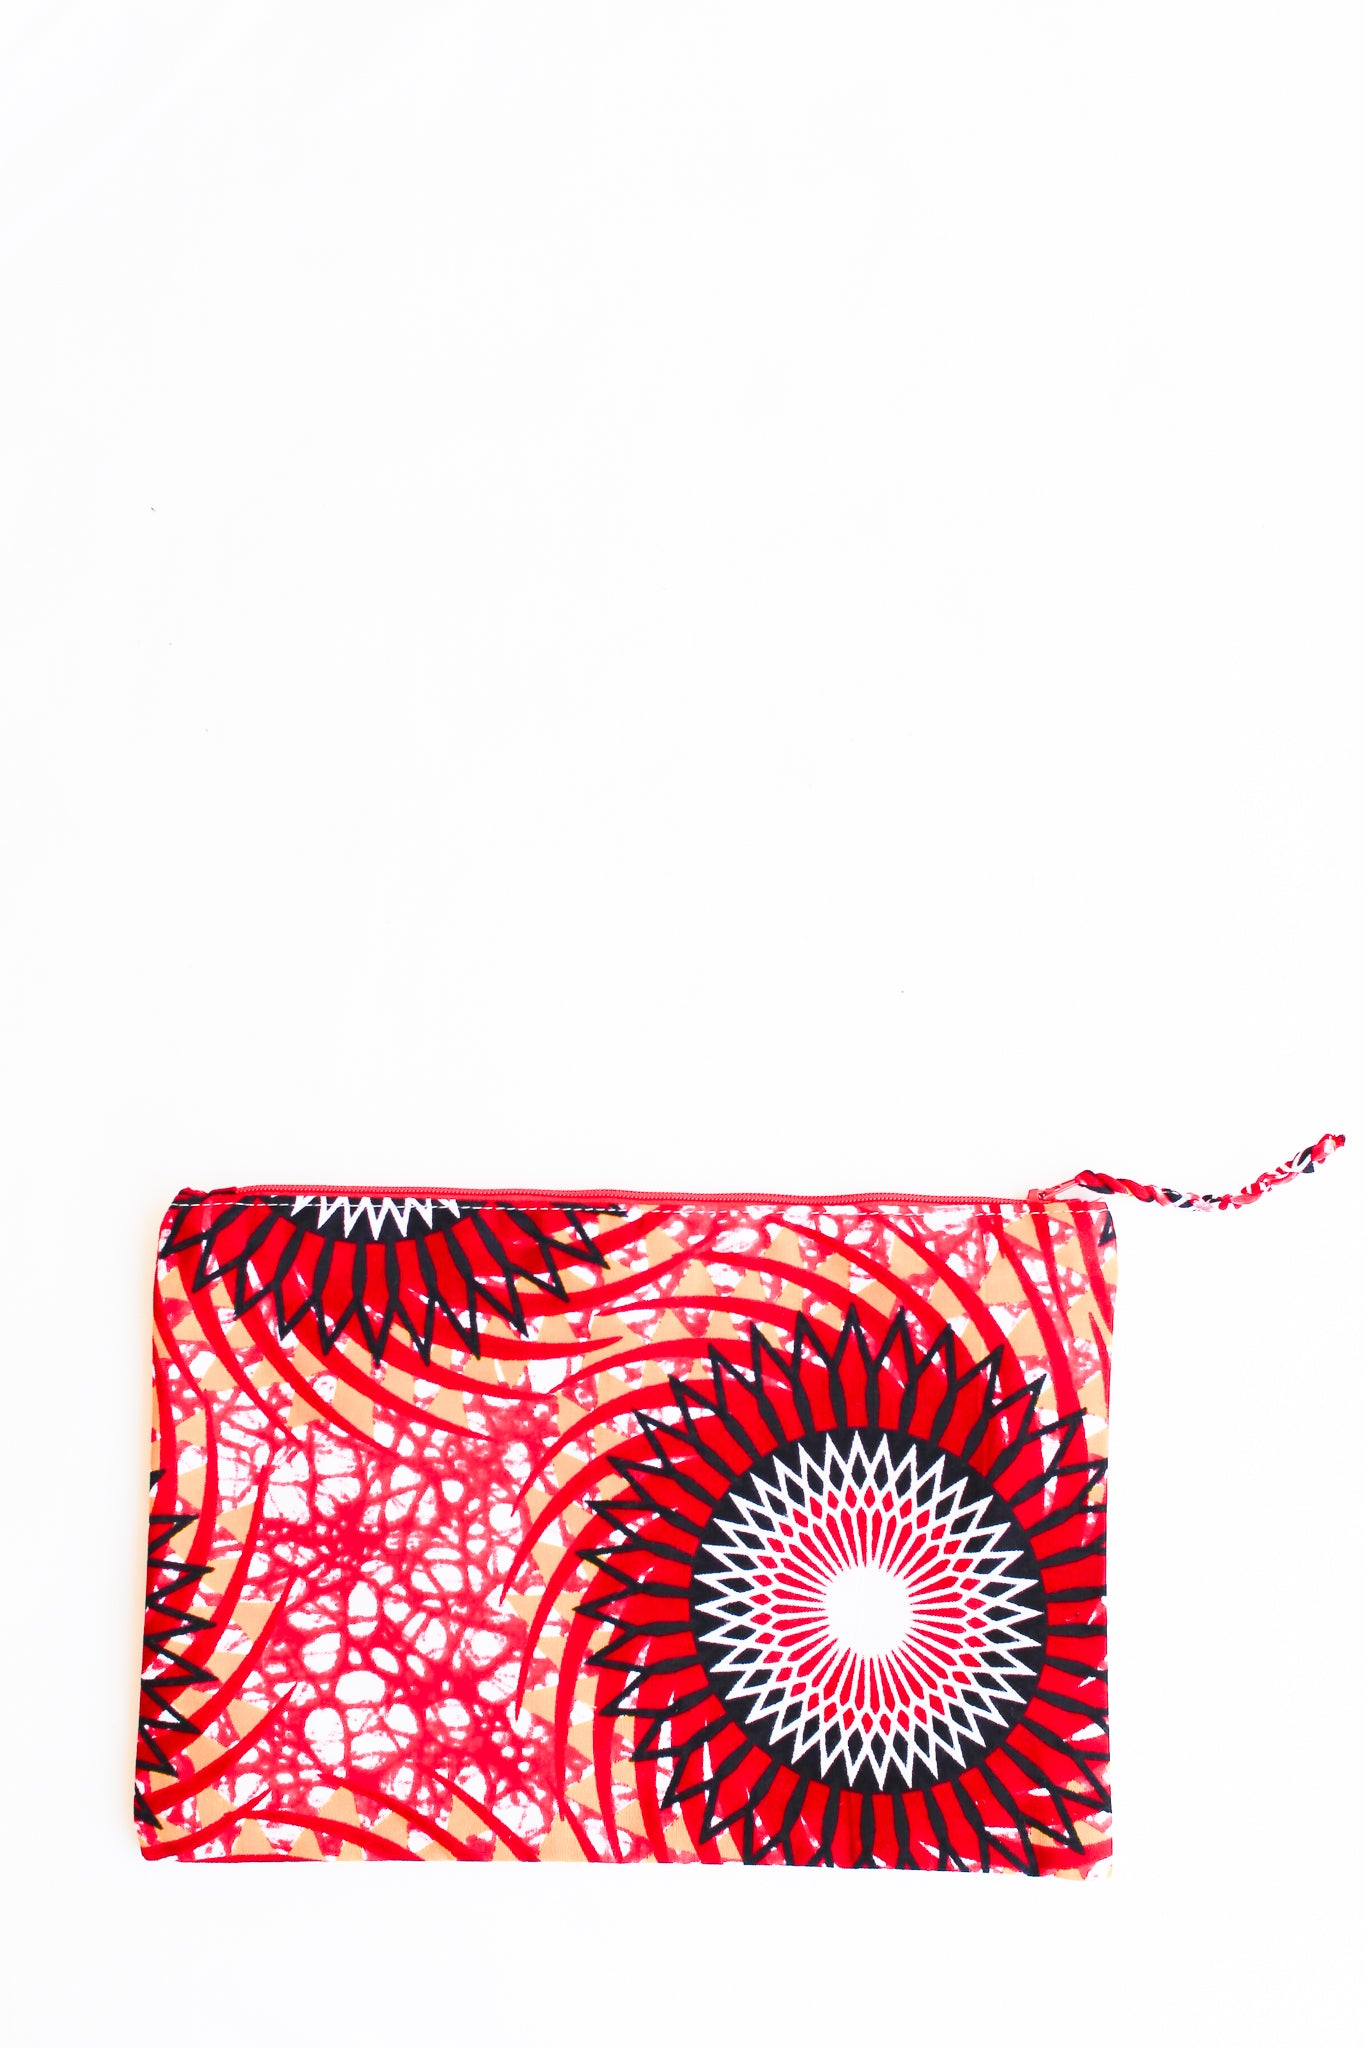 Embroidered Zebra Pouch, Hot Pink